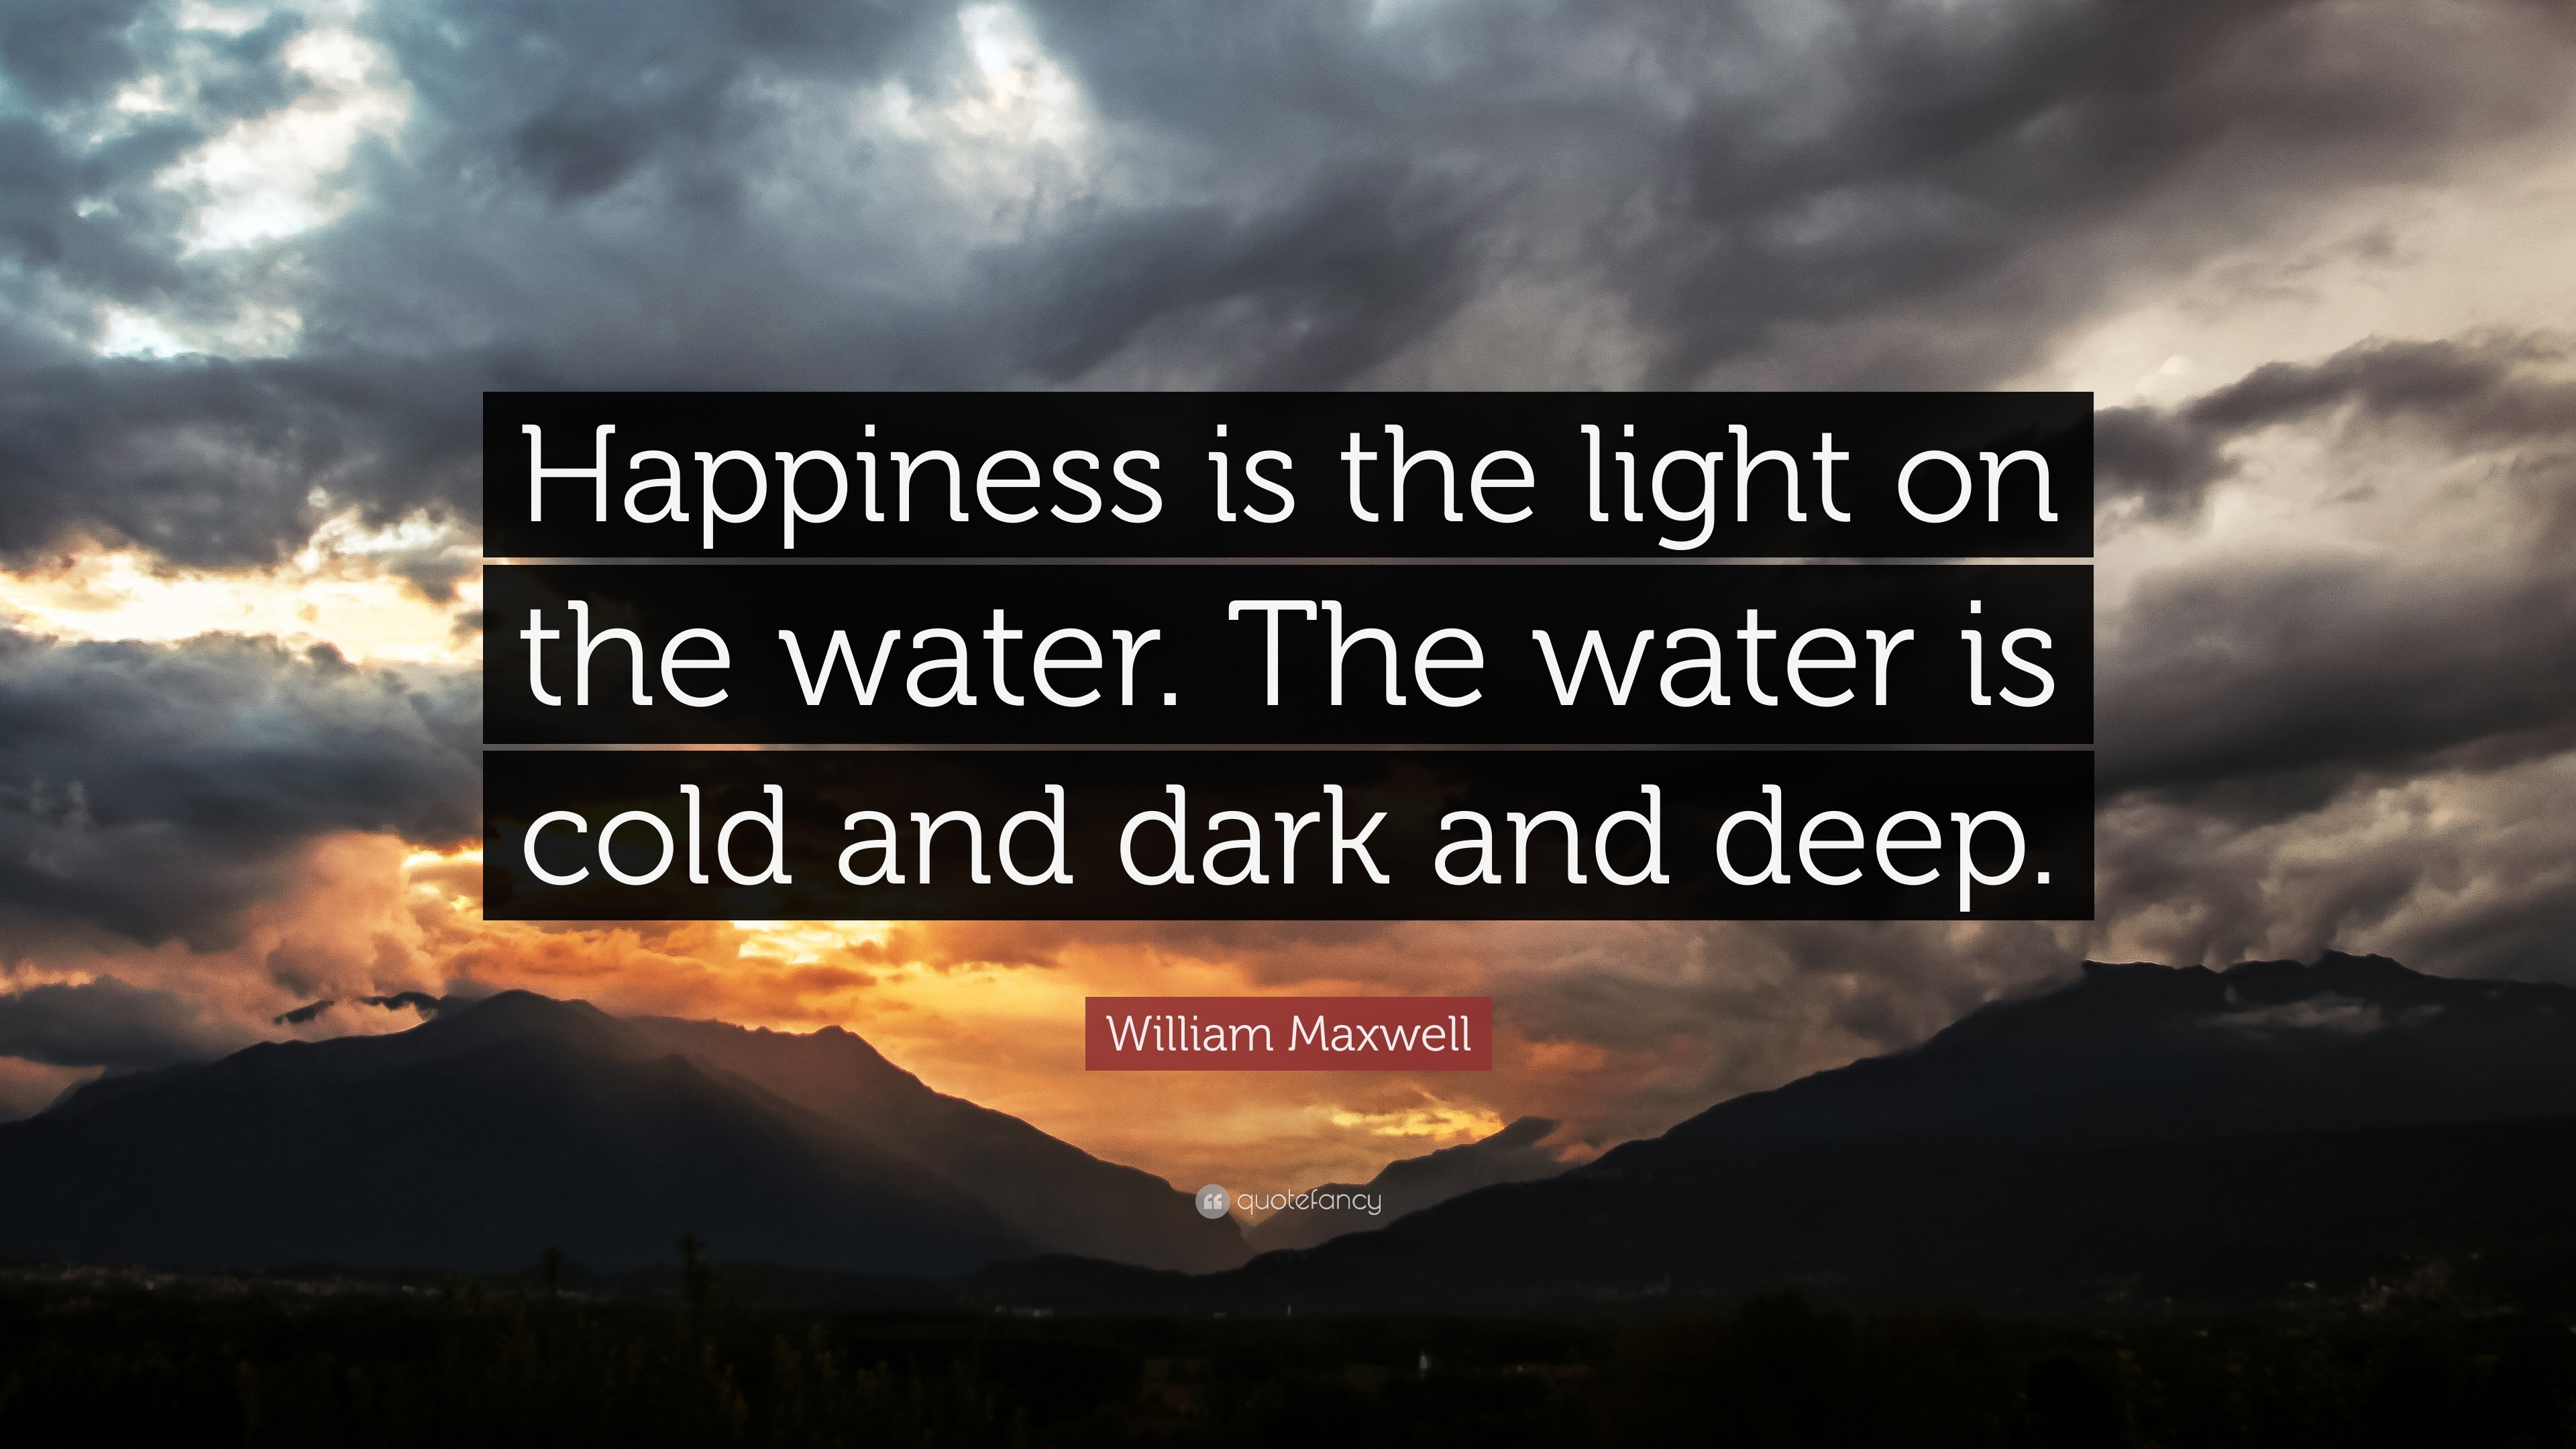 William Maxwell Quote: “Happiness is the light on the The water is cold and dark